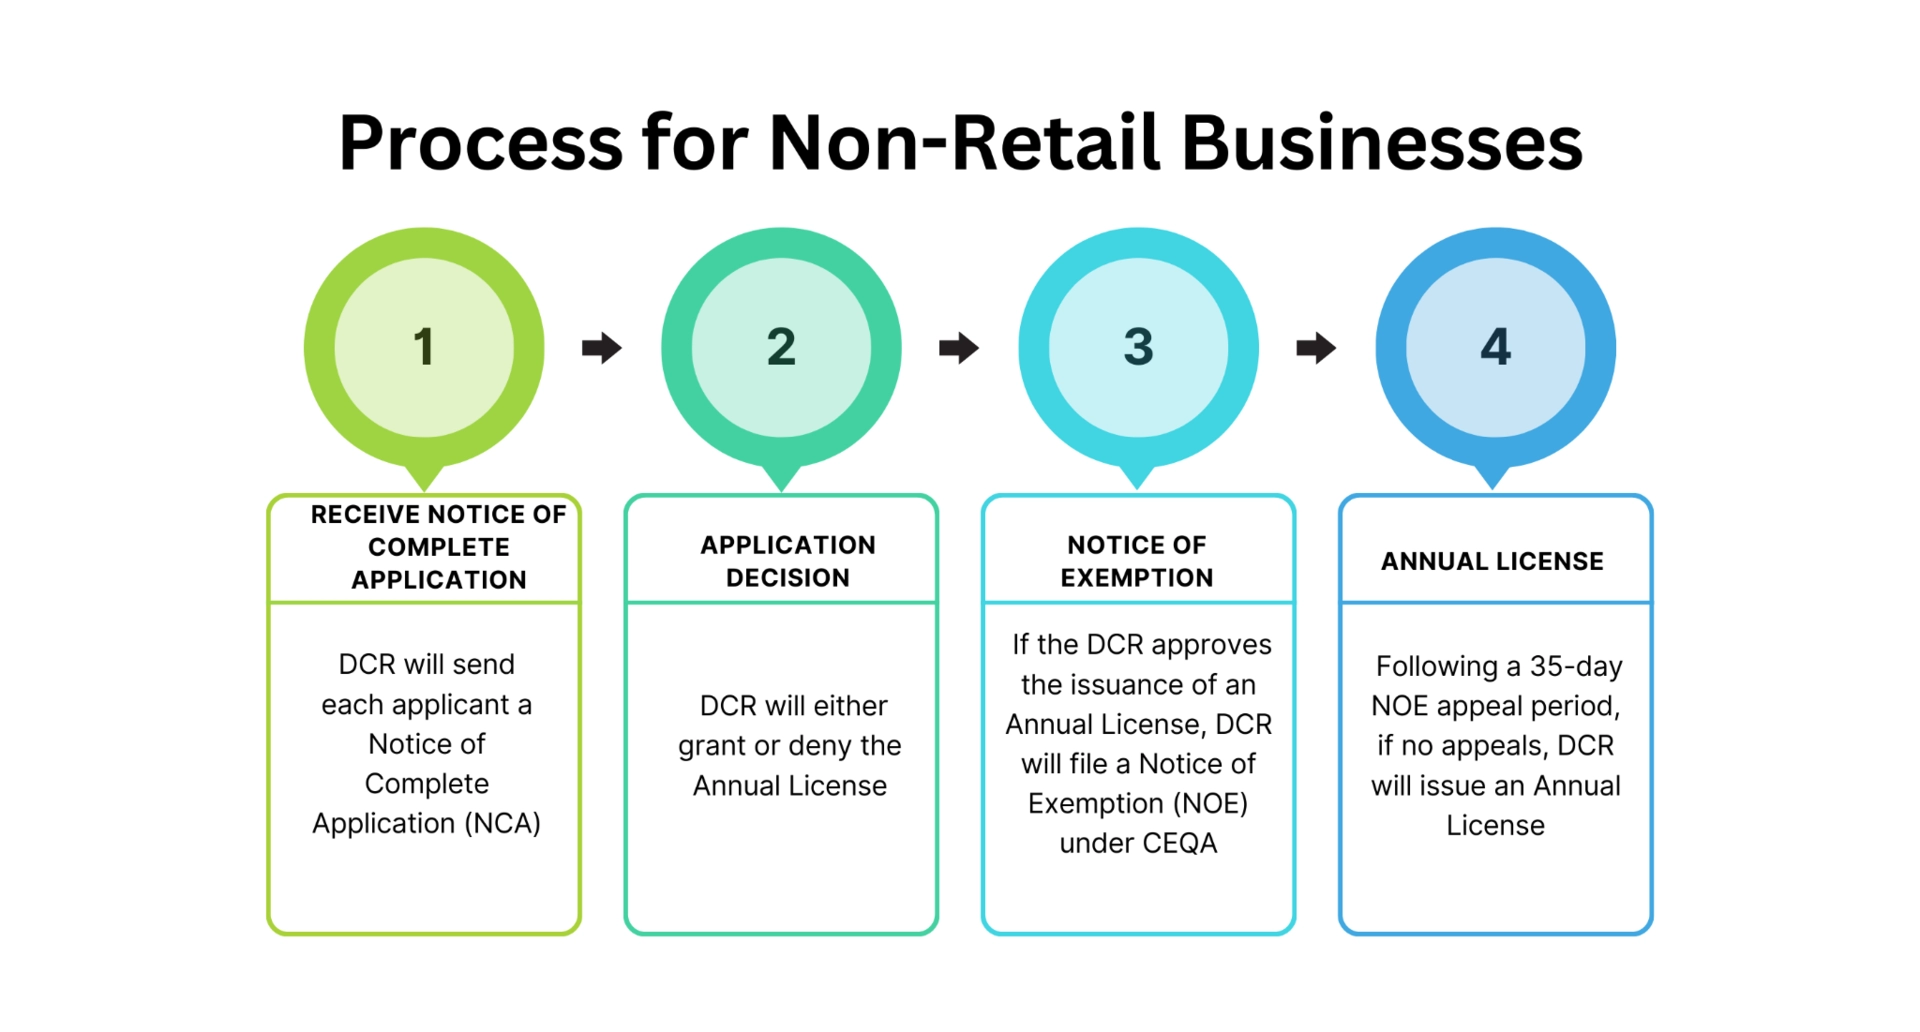 Process for Non-Retail Business Infographic - Details Below